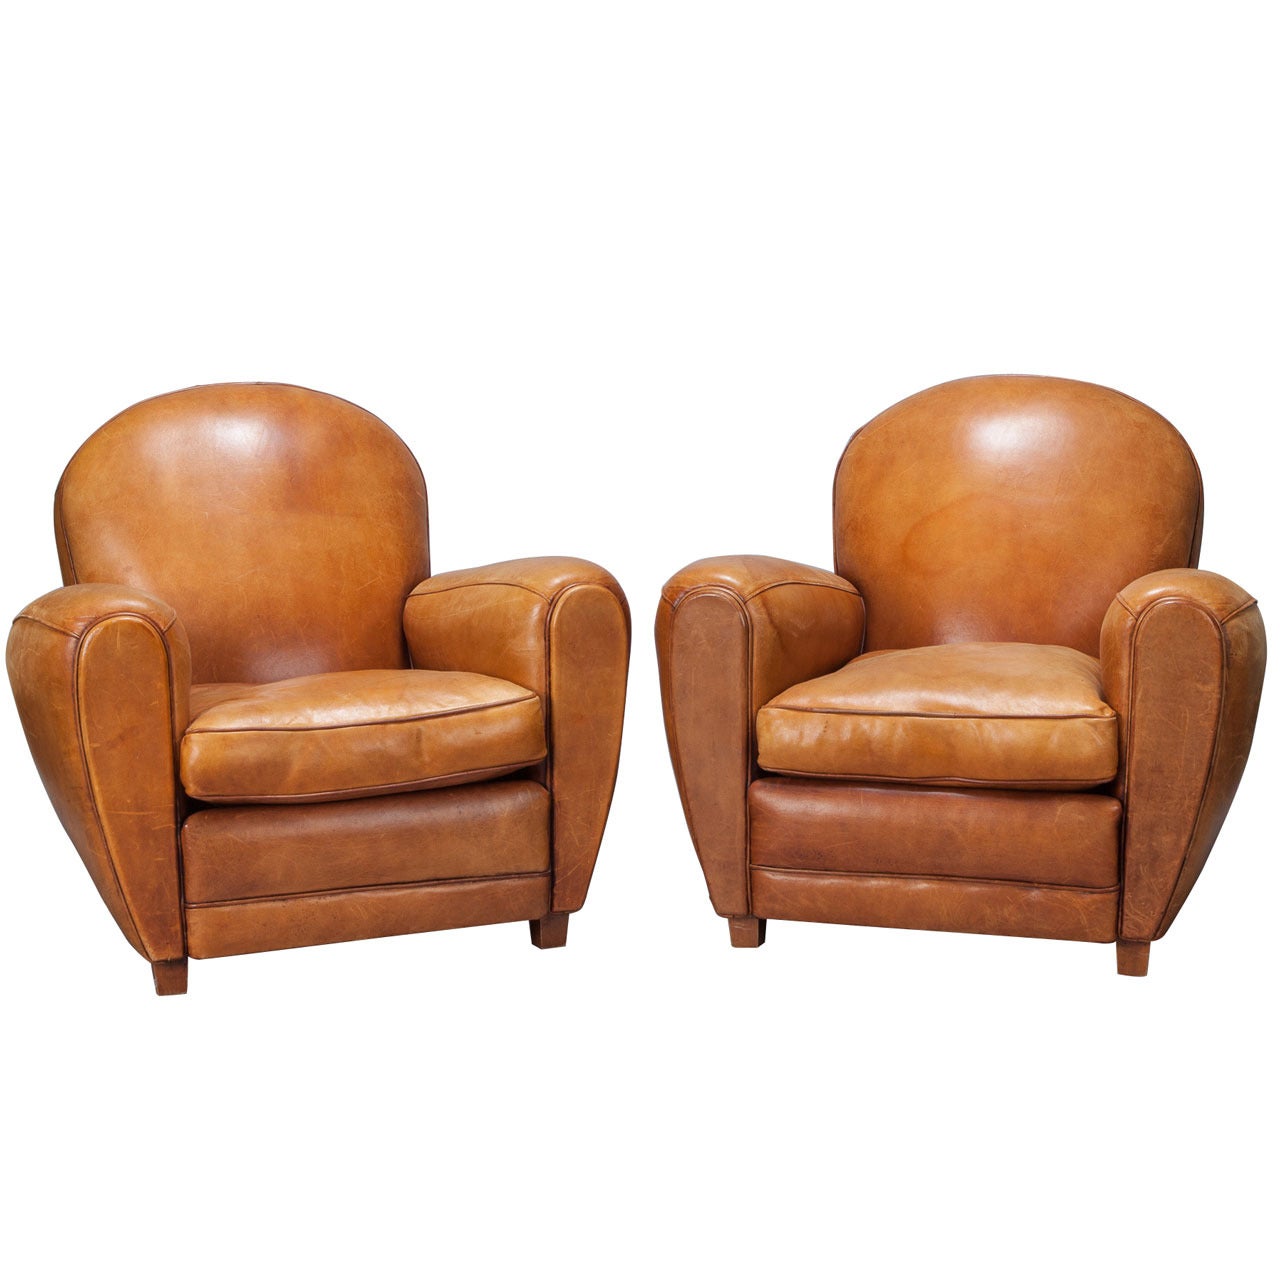 Pair of Art Deco Caramel Colored Leather Club Chairs